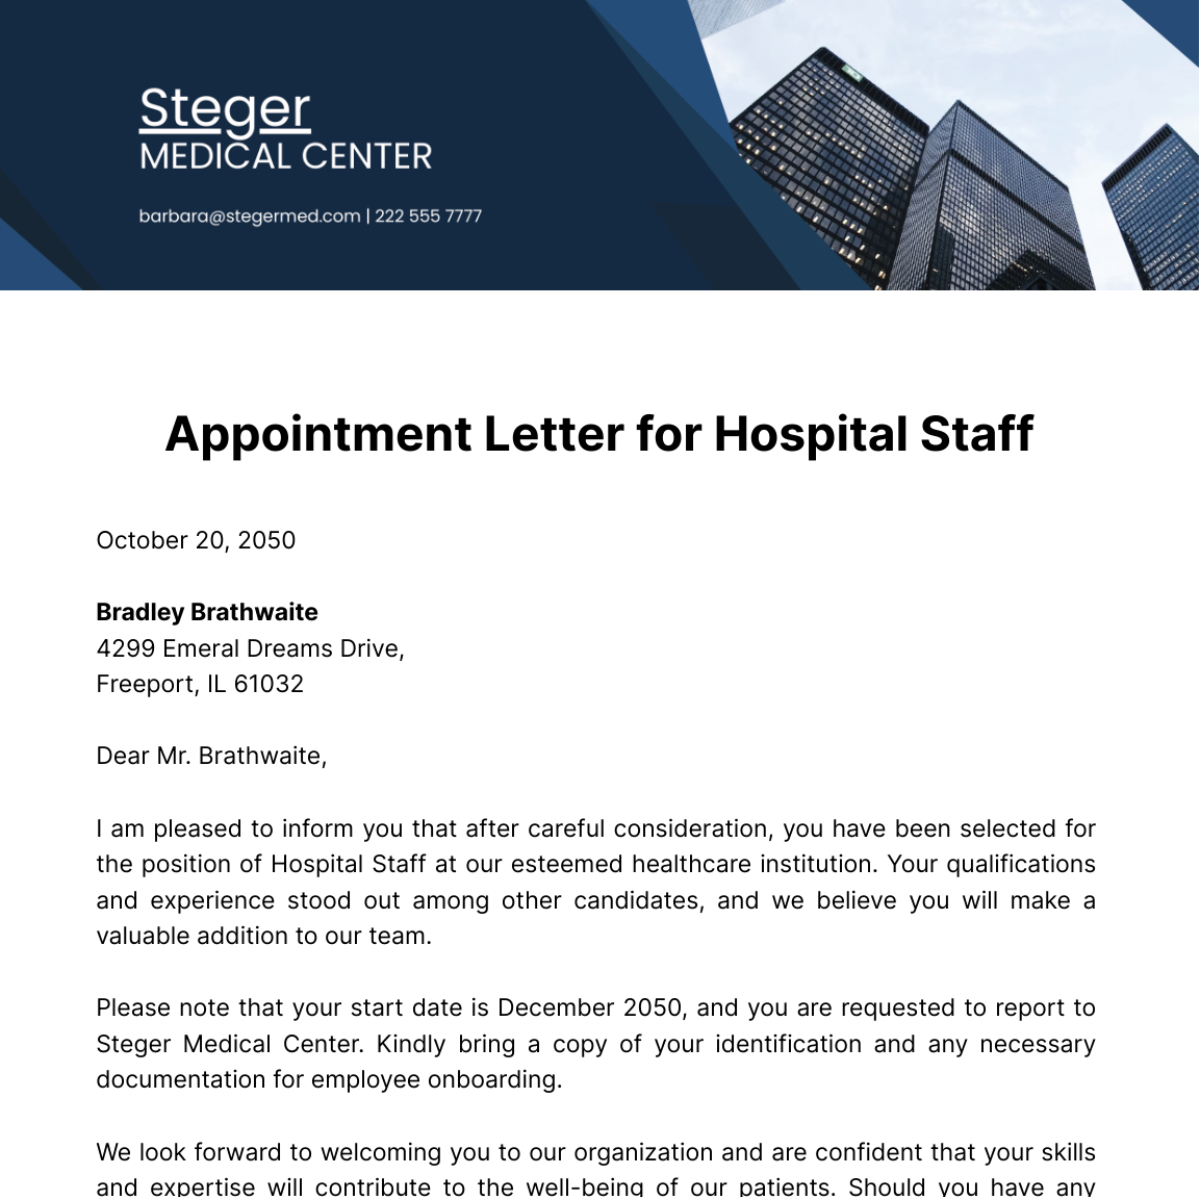 Appointment Letter for Hospital Staff Template